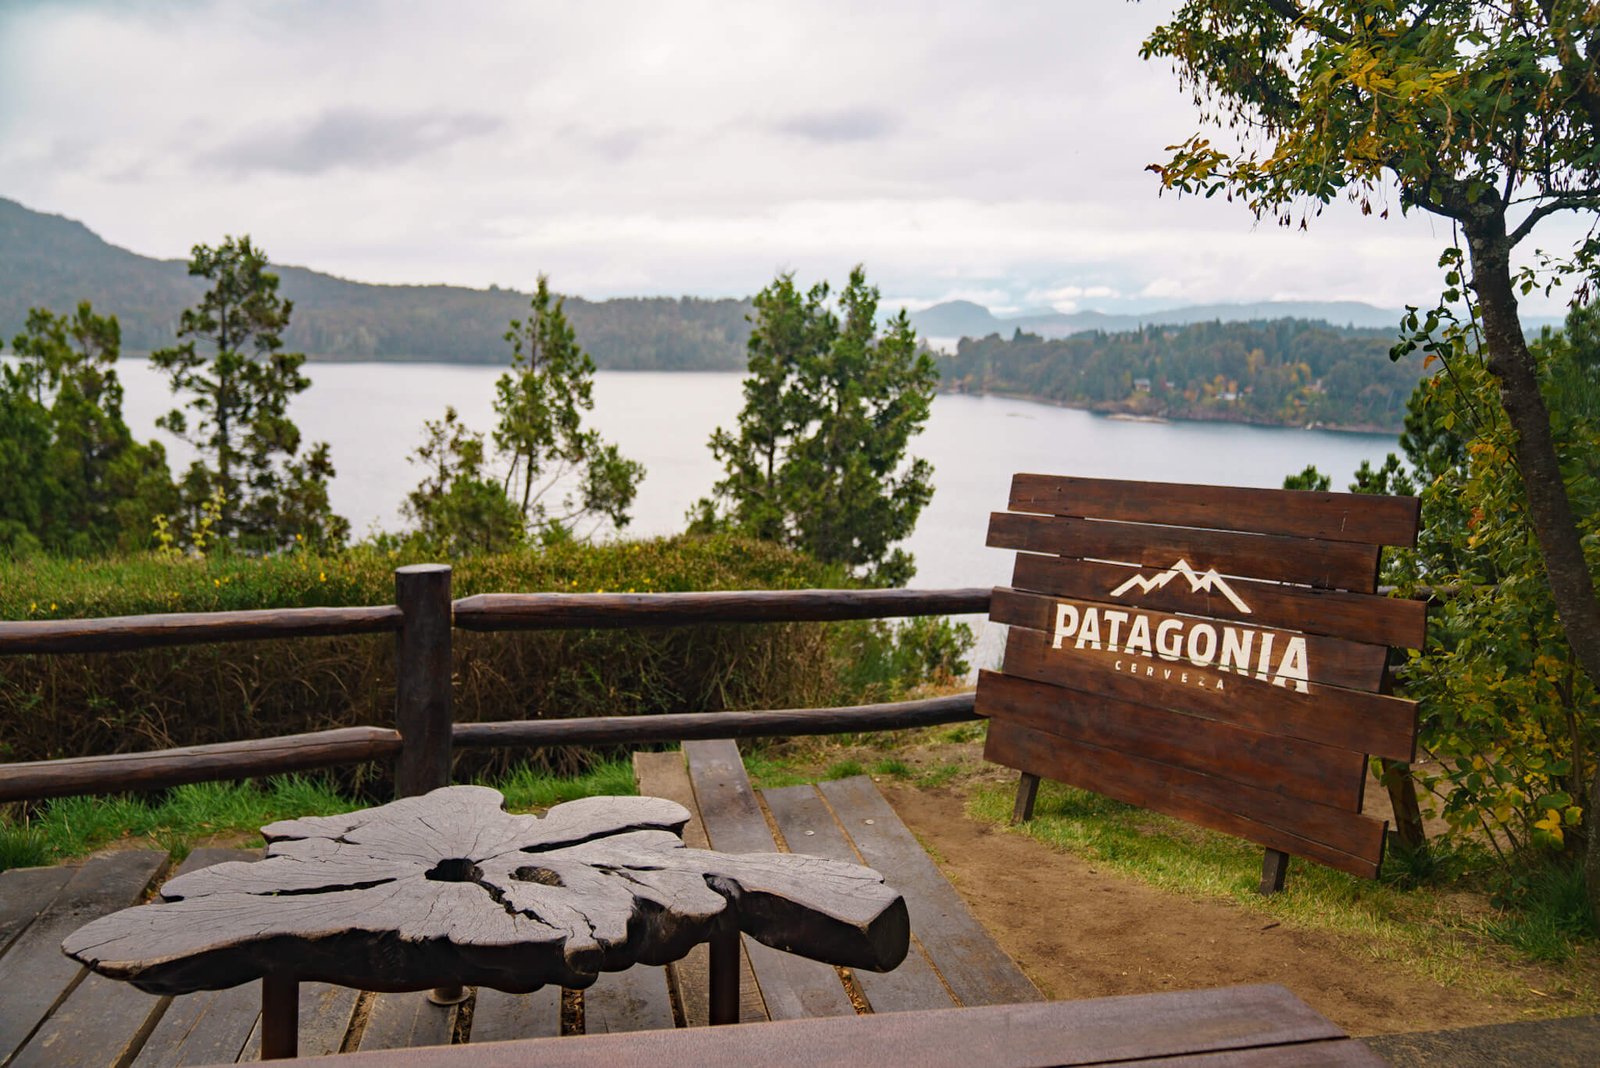 Patagonia brewery, Bariloche in Argentina